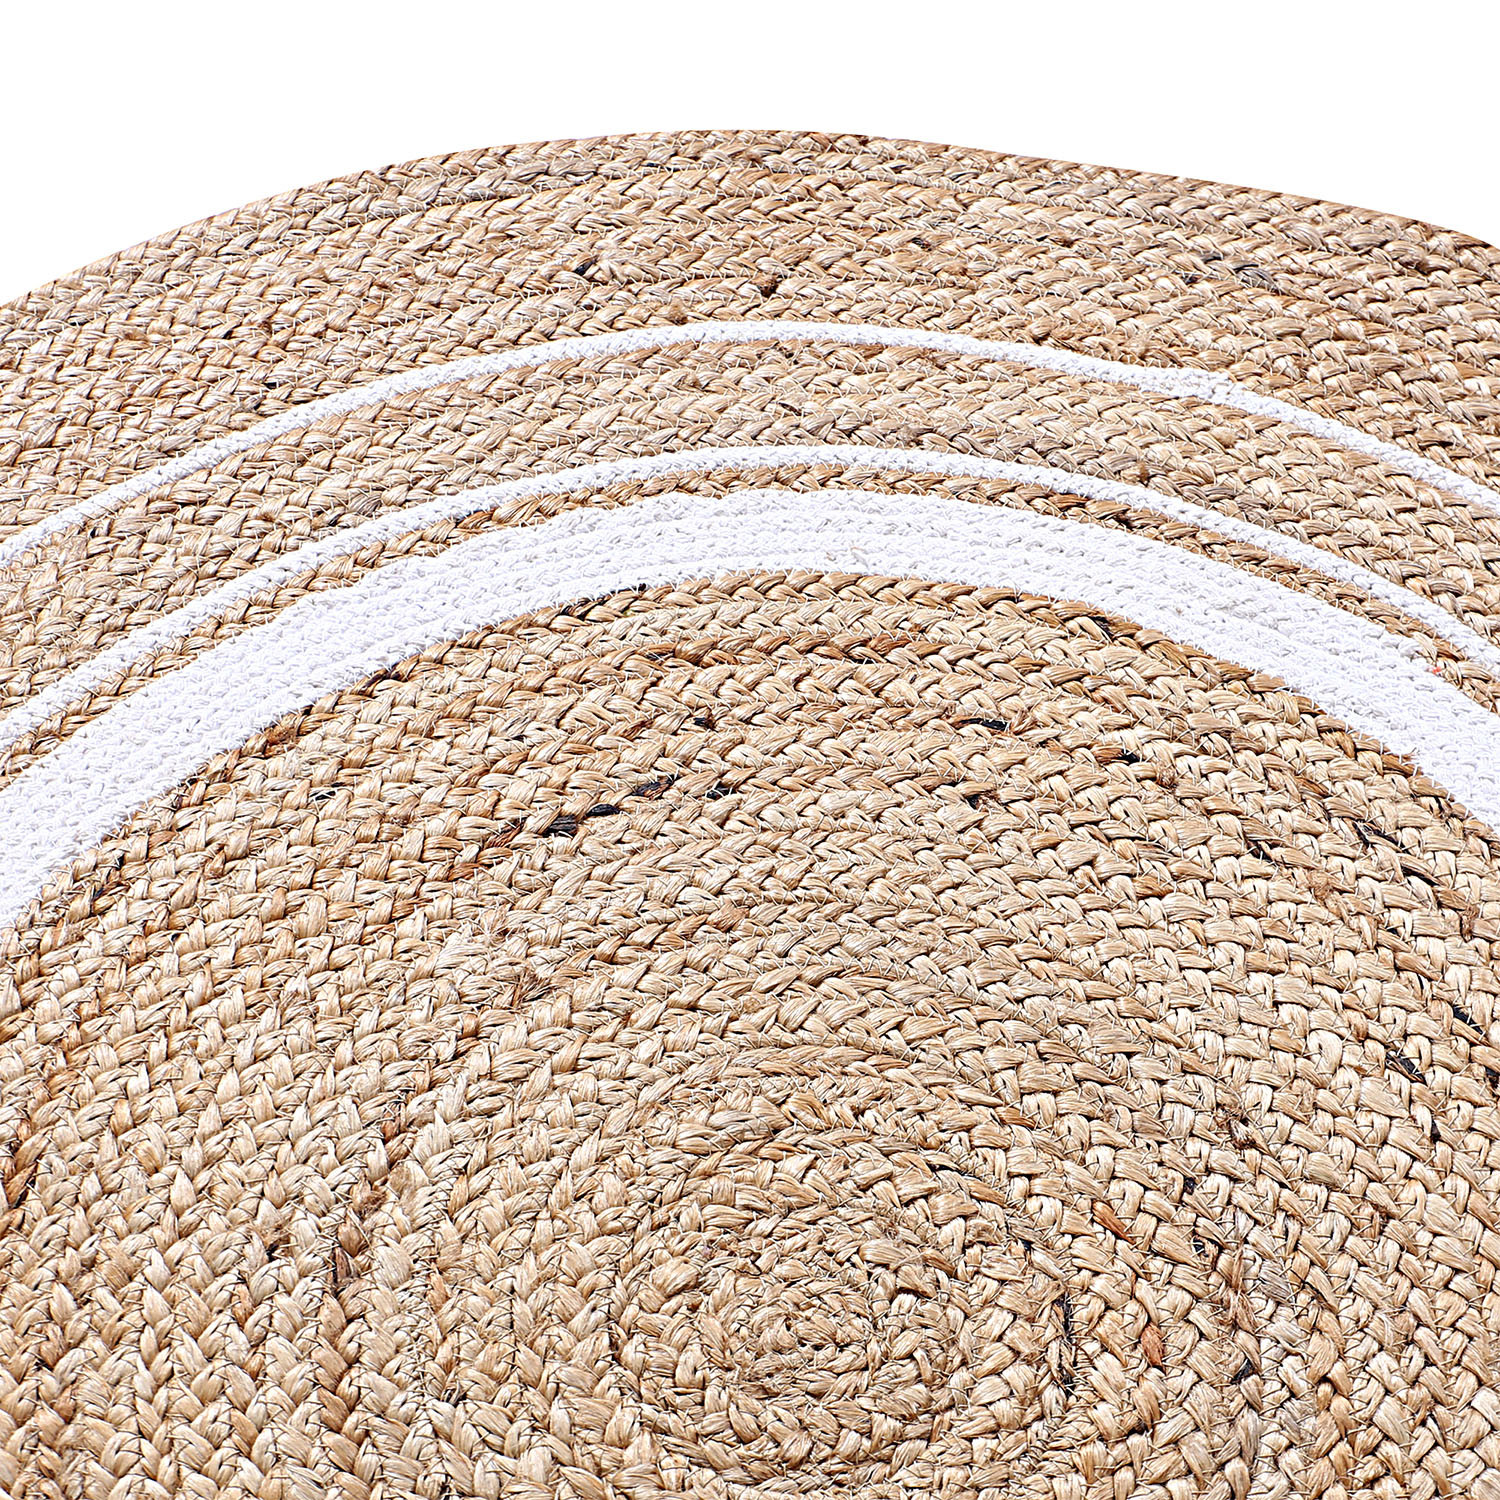 Kuber Industries Hand Woven Braided Carpet Rugs|Anti-Skid Round Traditional Spiral Design Jute Door mat|Mat For Bedroom,Living Room,Dining Room,Yoga,92 x 92 cm,(White)